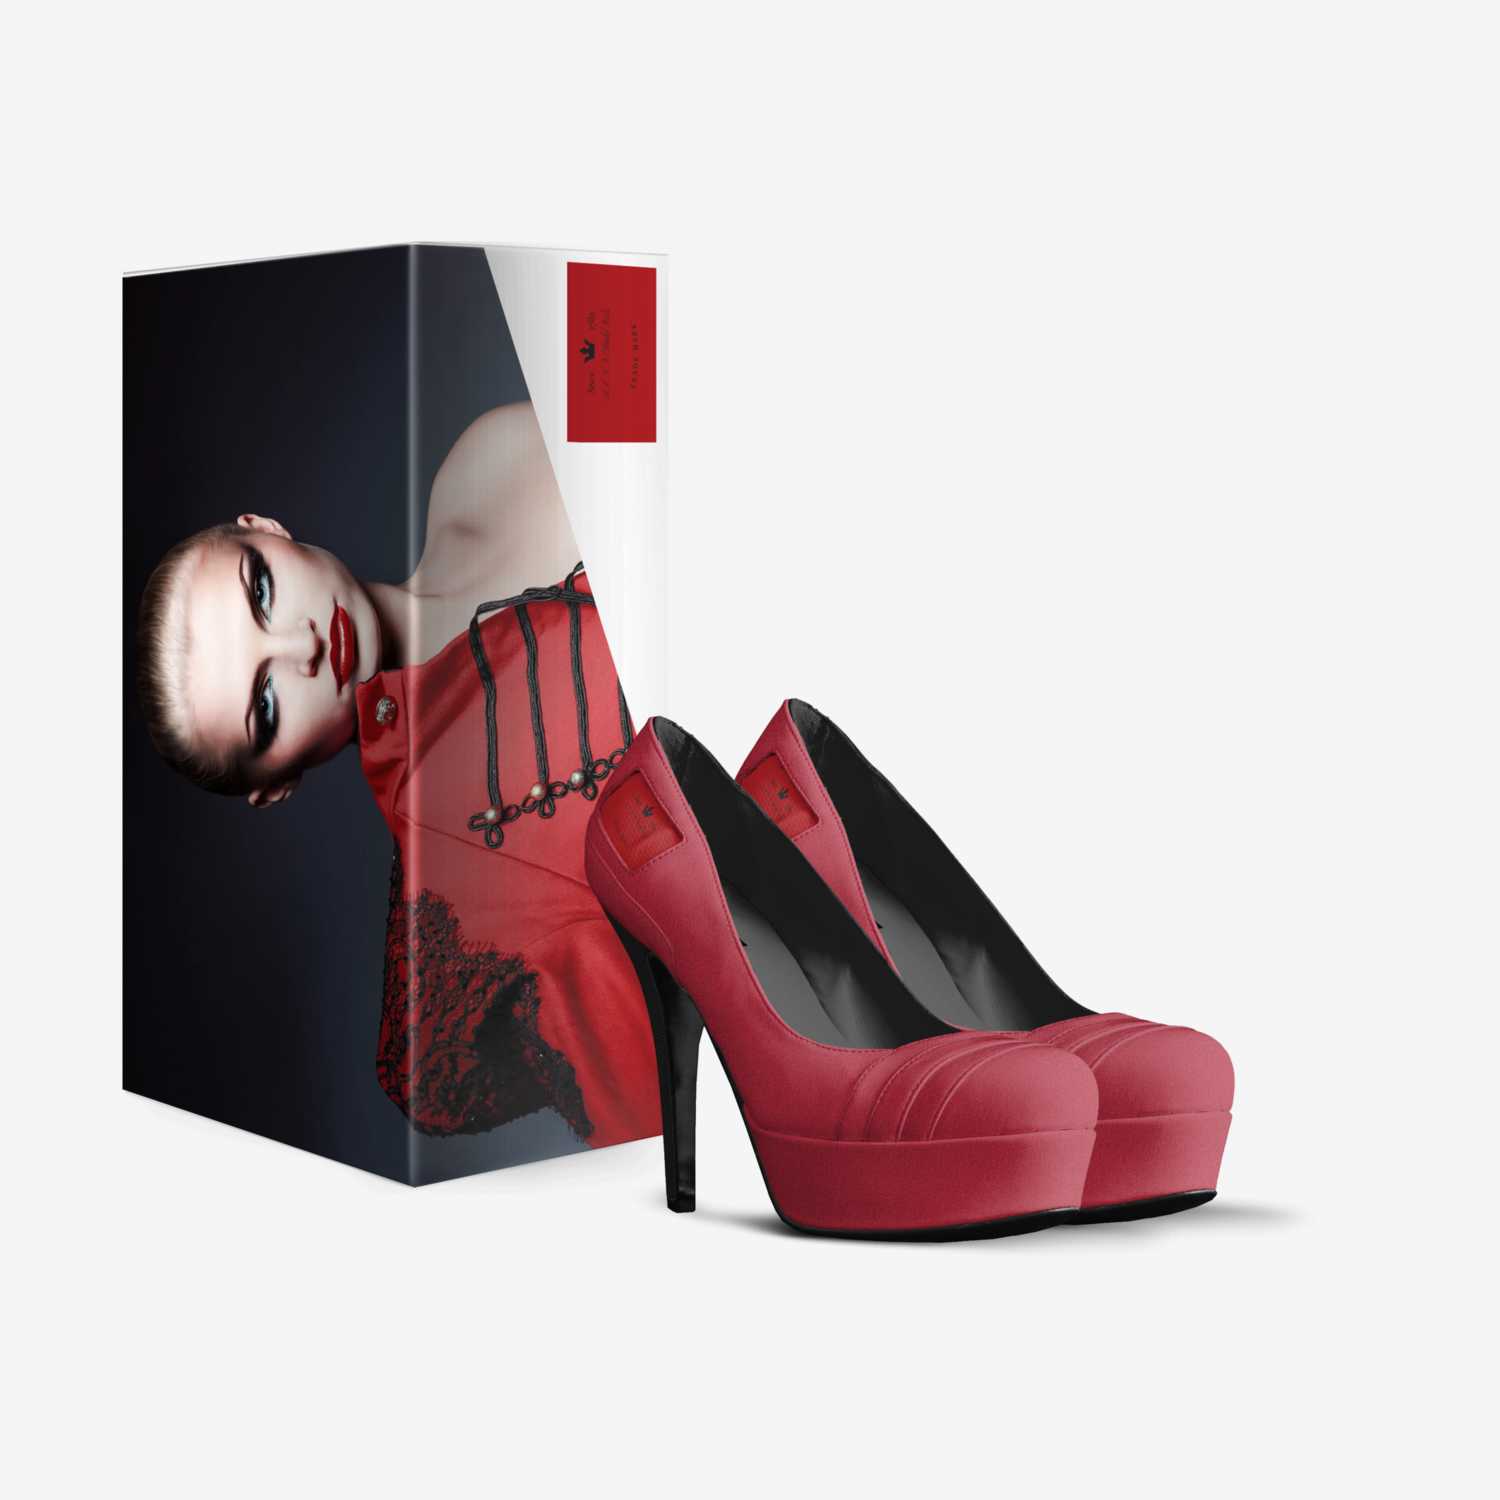 A L X X/Badd Girls custom made in Italy shoes by Alexander Bowie | Box view